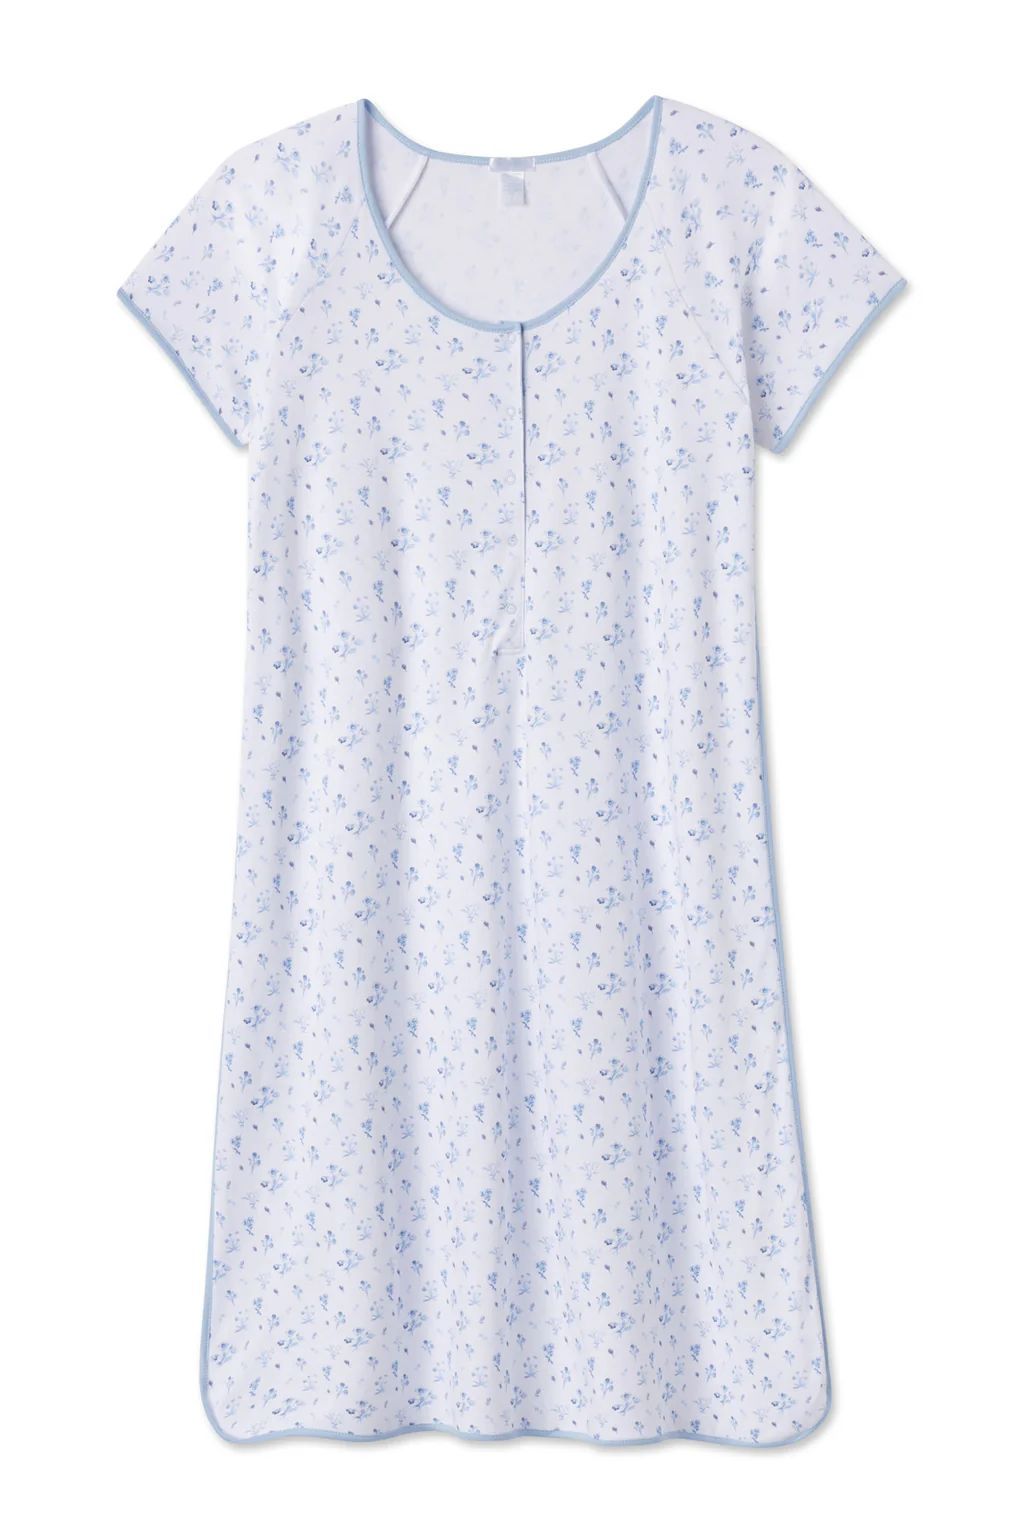 Pima Maternity Nightgown in French Blue Floral | Lake Pajamas